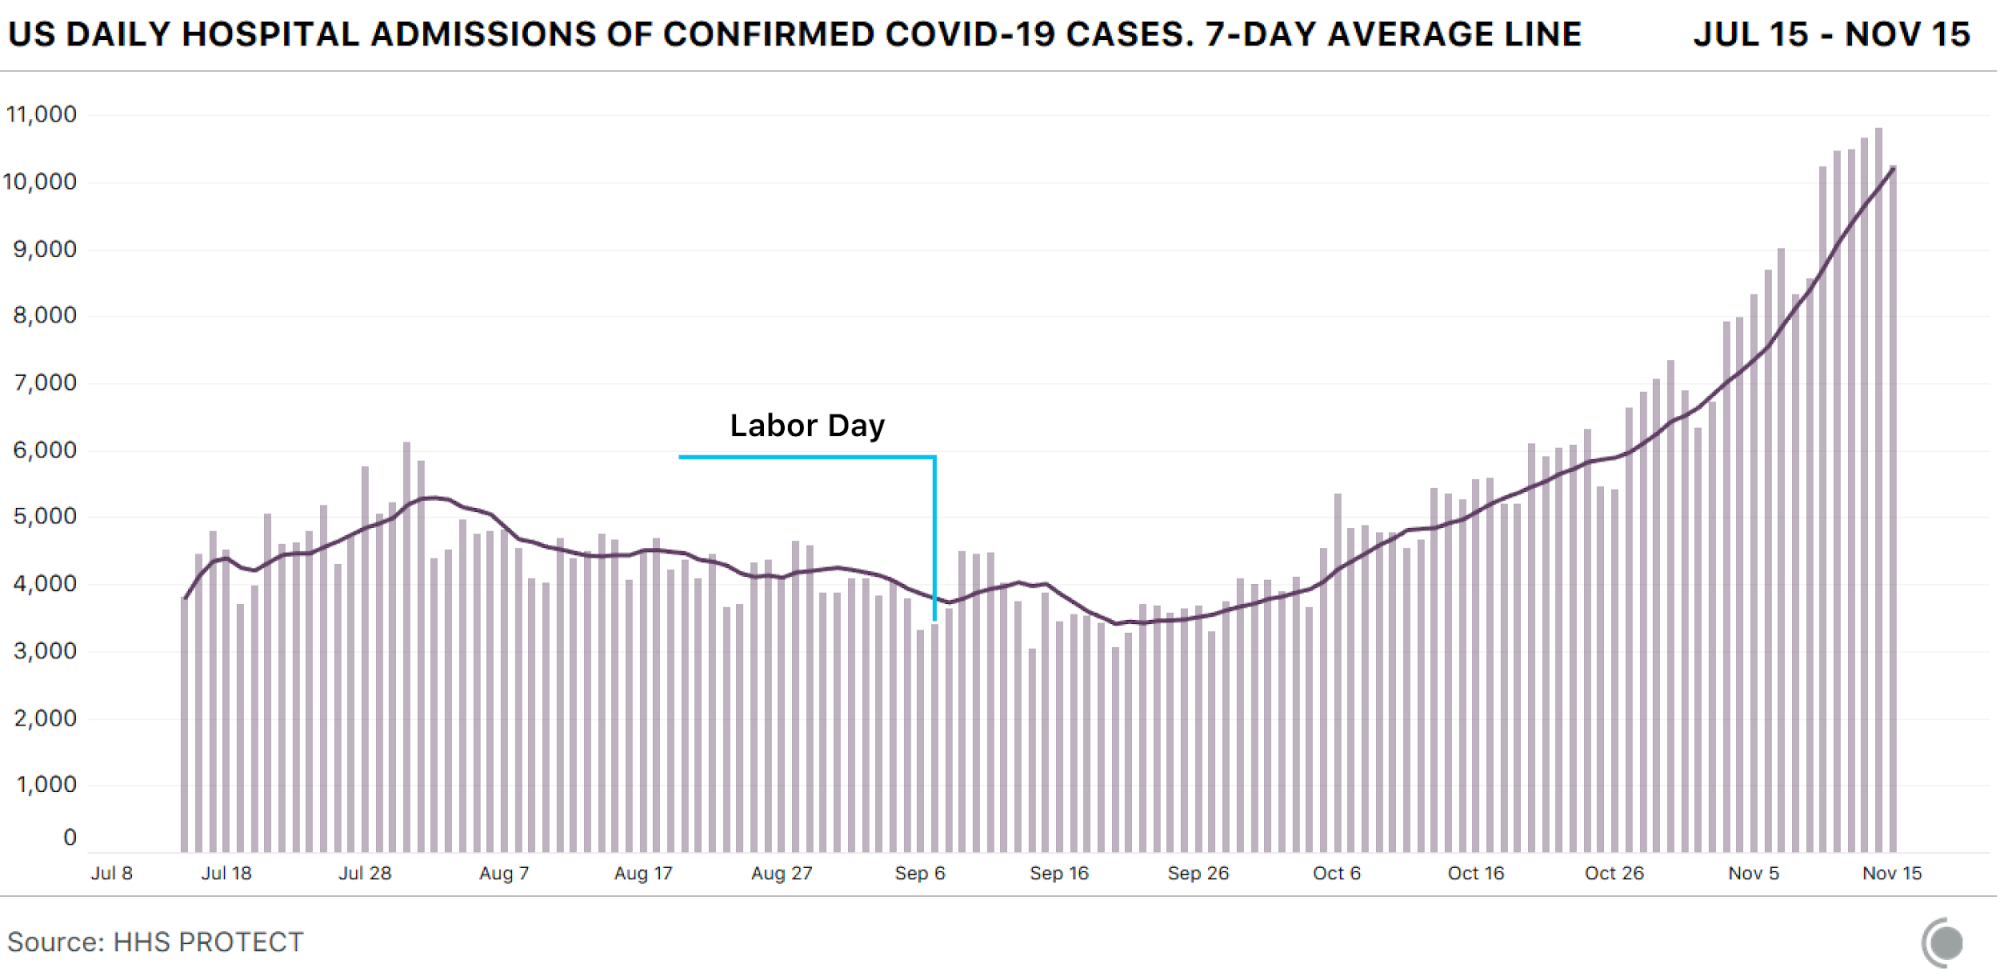 Bar chart showing US daily hospital admissions from COVID-19. These are at record highs over the past week. The data was generally not affected by the Labor Day holiday.